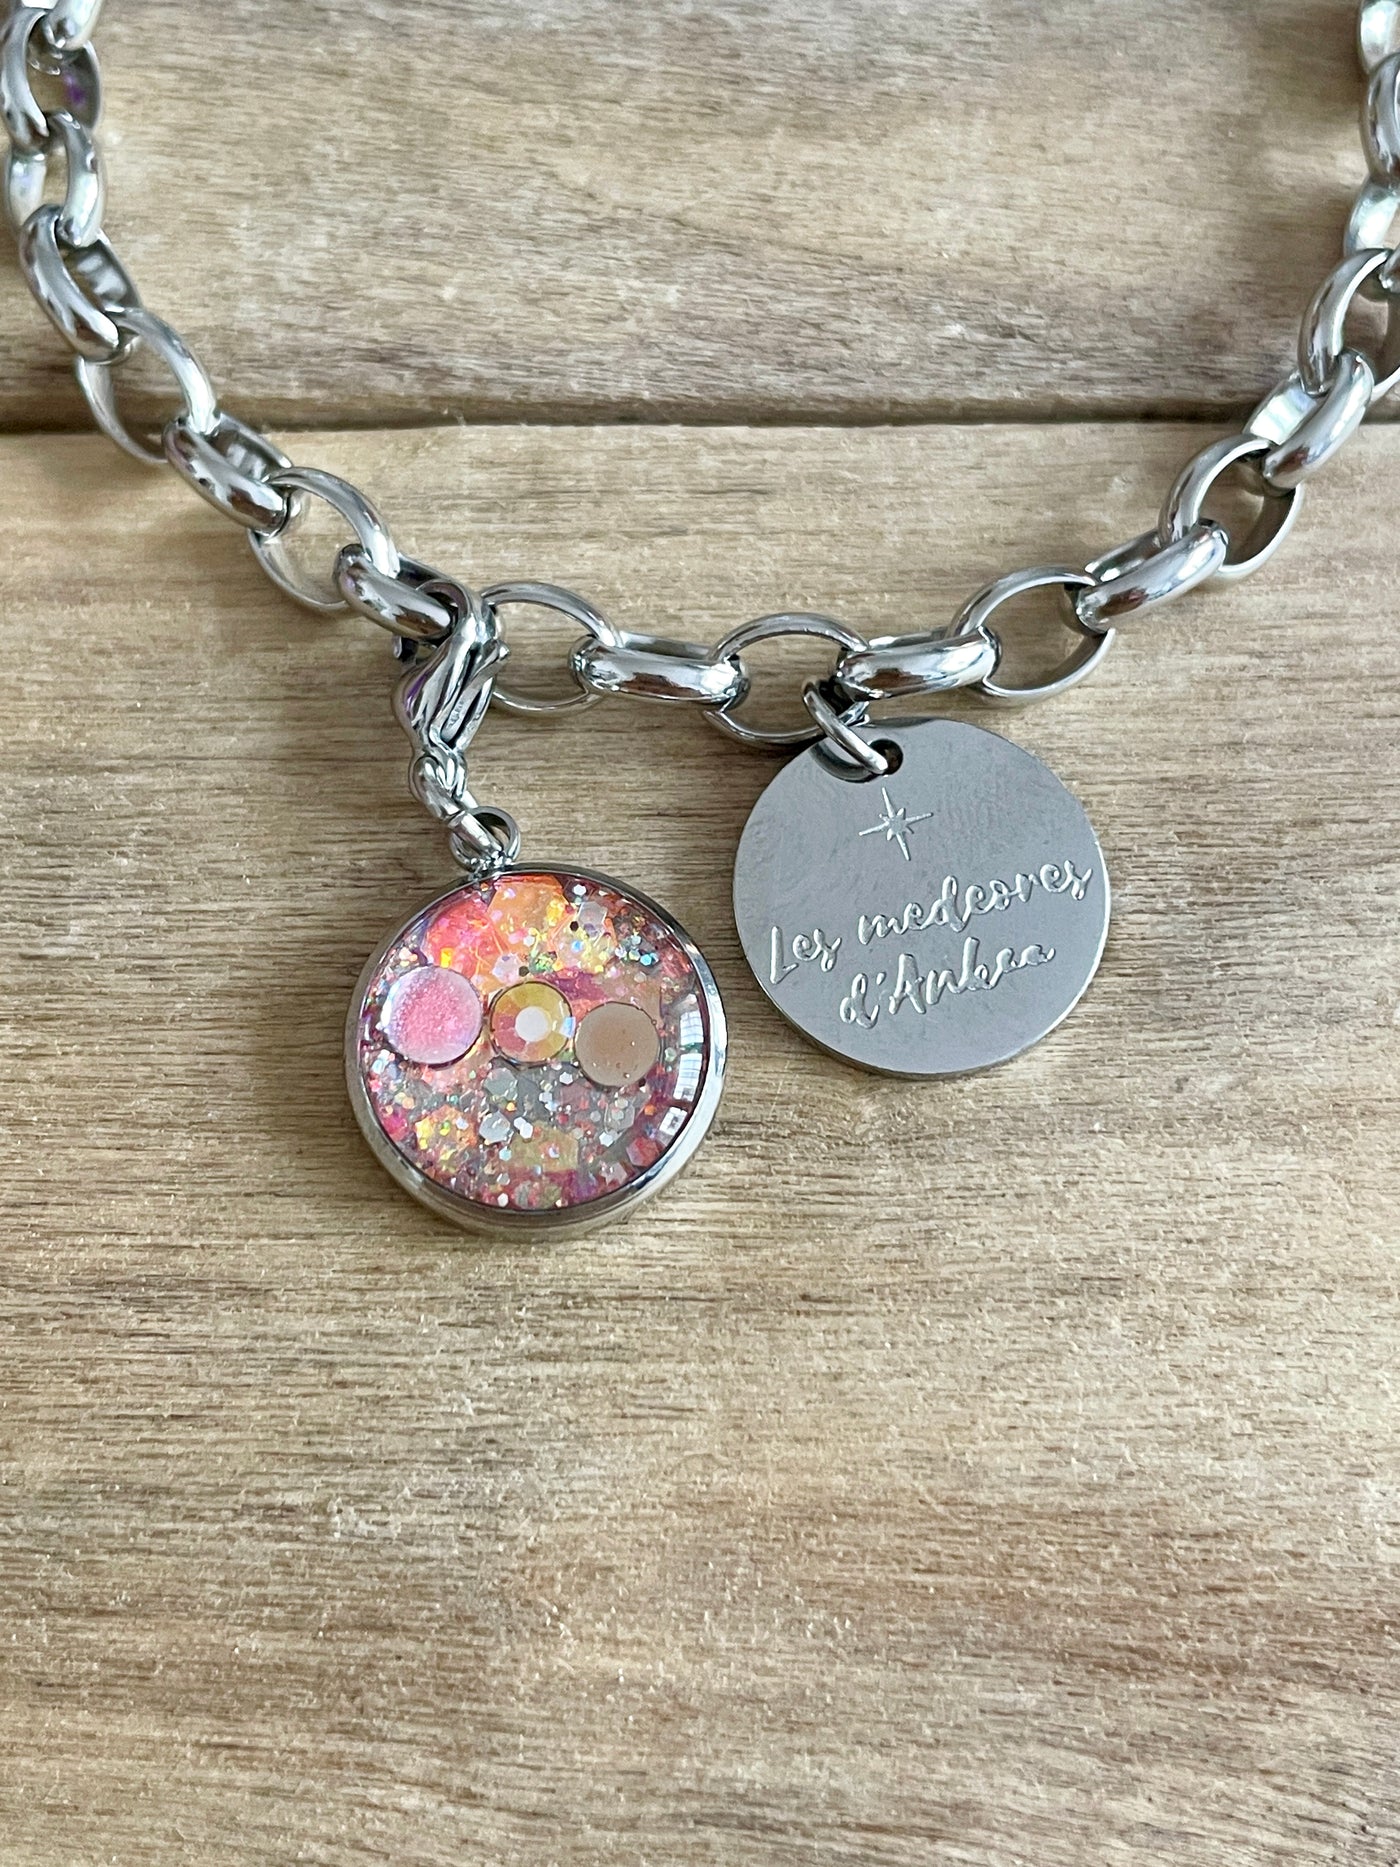 Silver Medeore ALIGNMENT MISSION OF LIFE charm (charm sold alone)